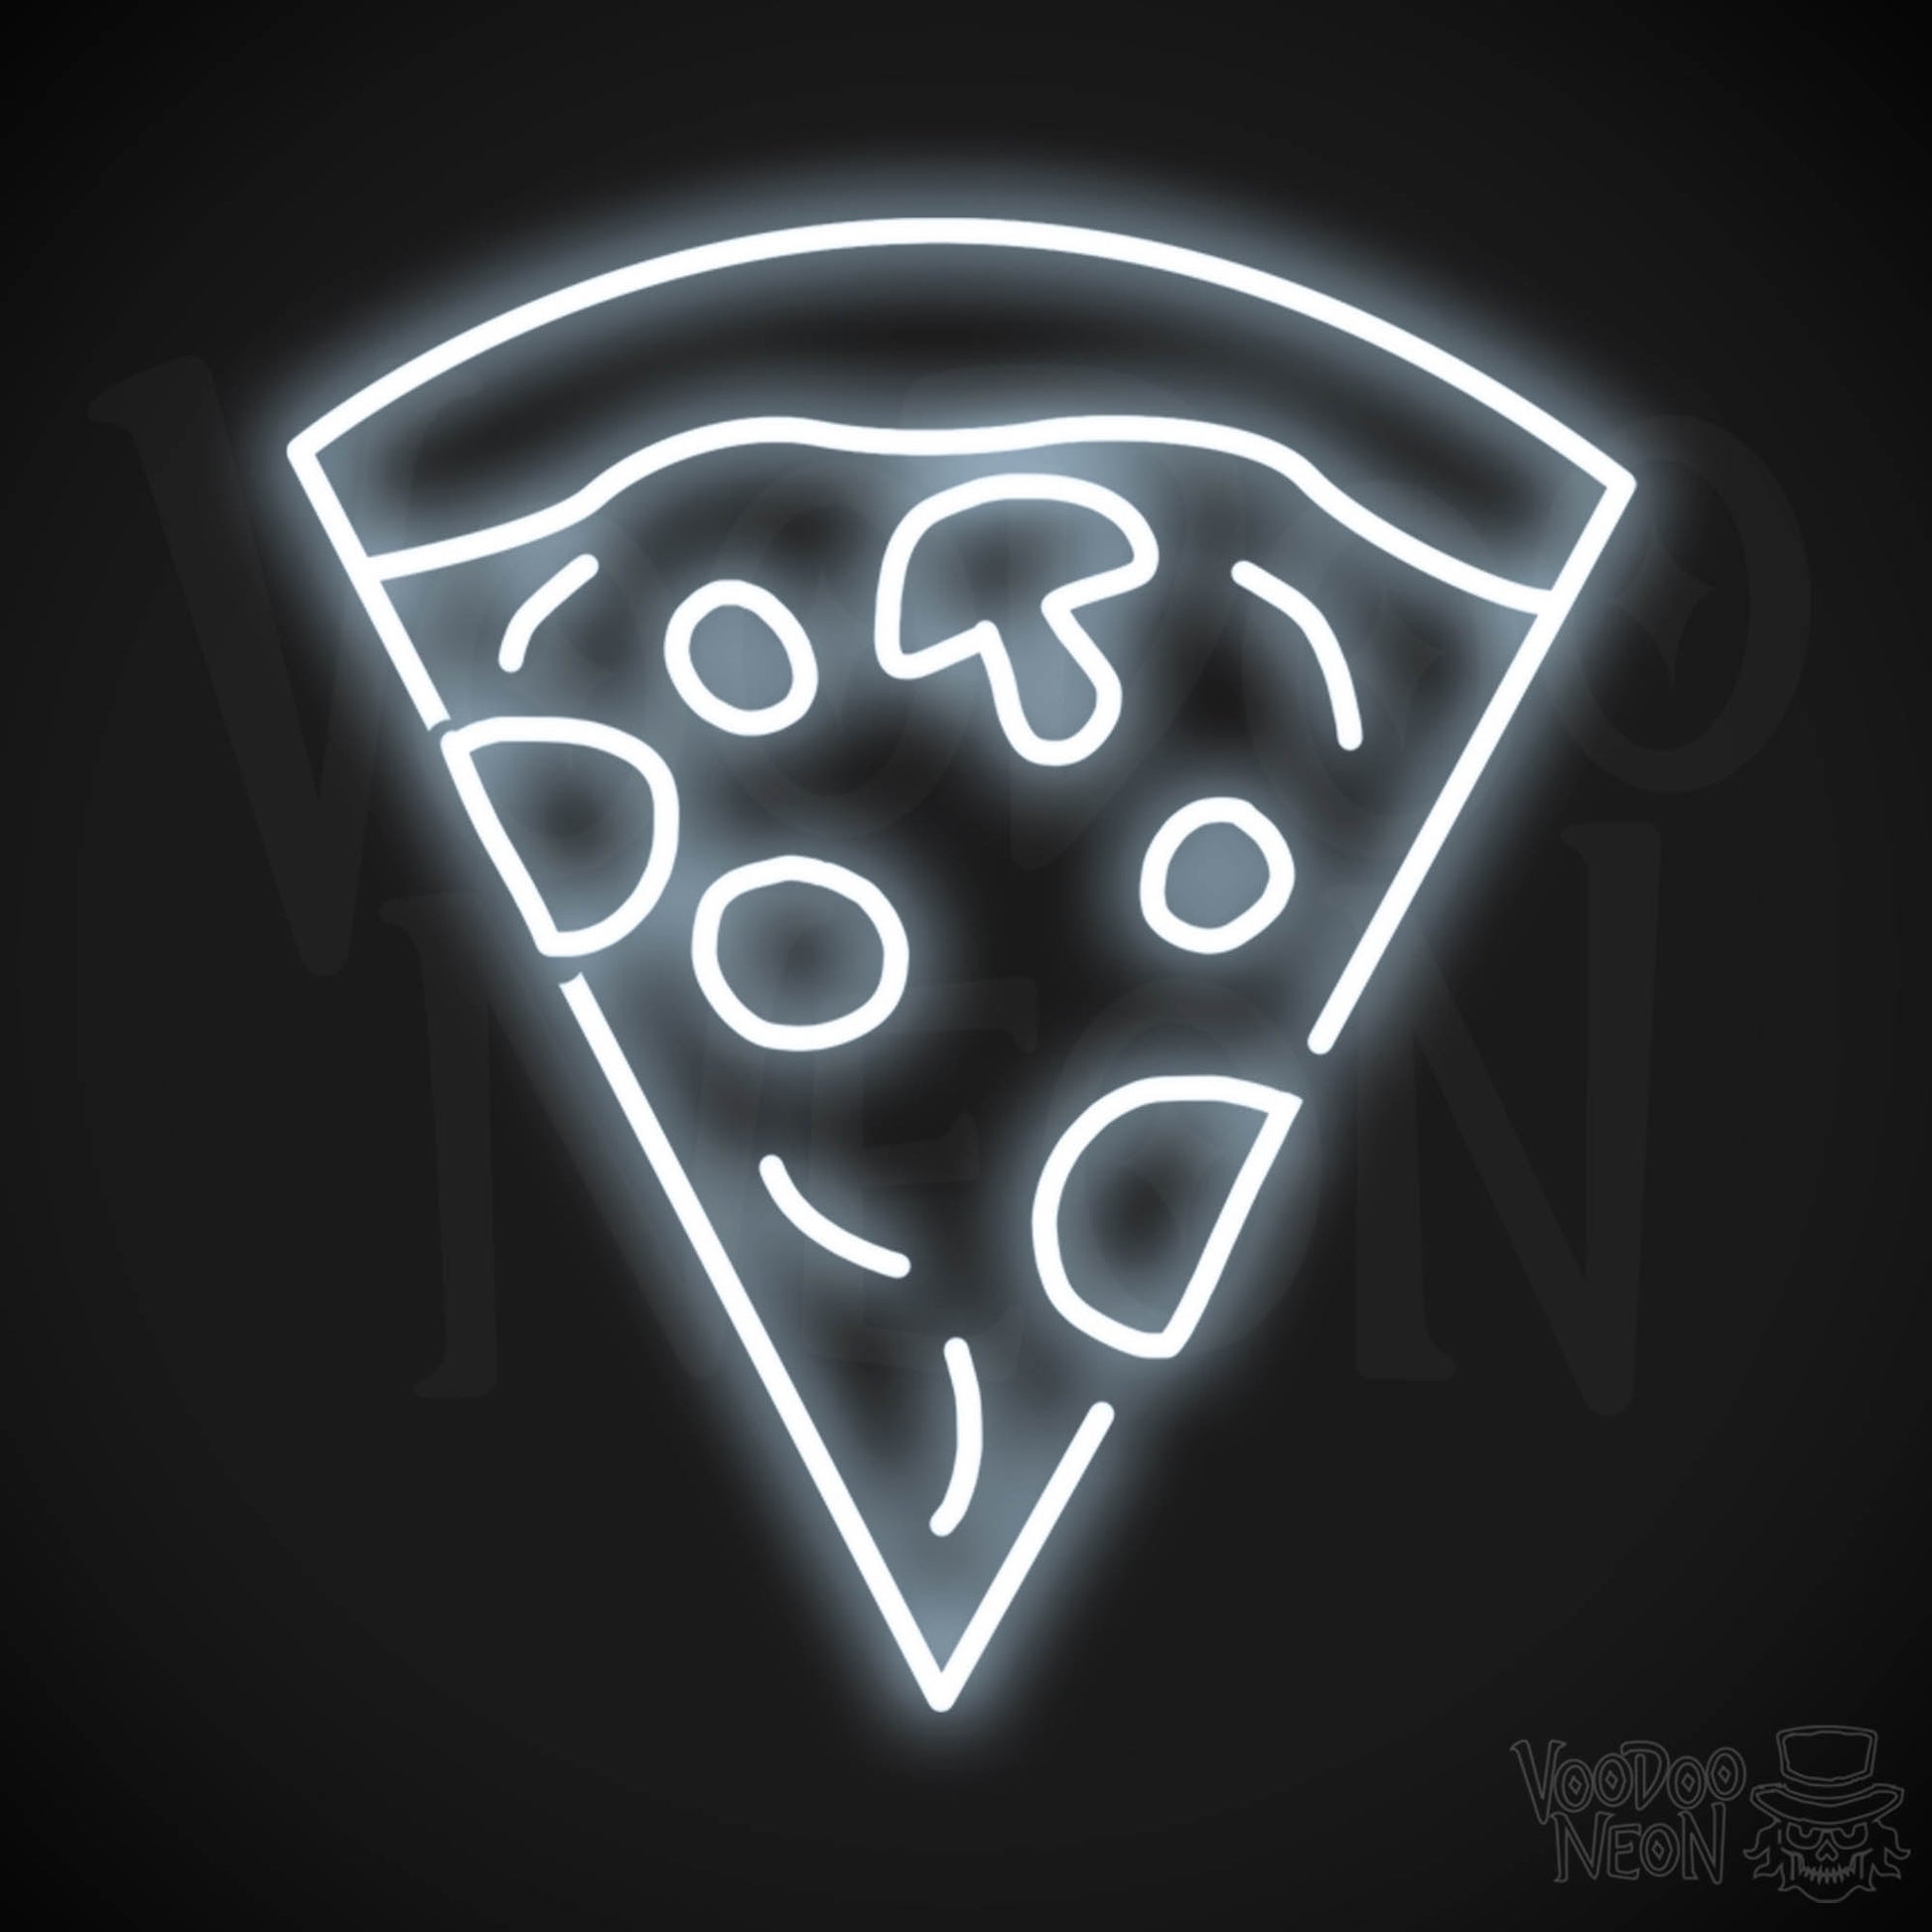 Pizza 4 LED Neon - Cool White